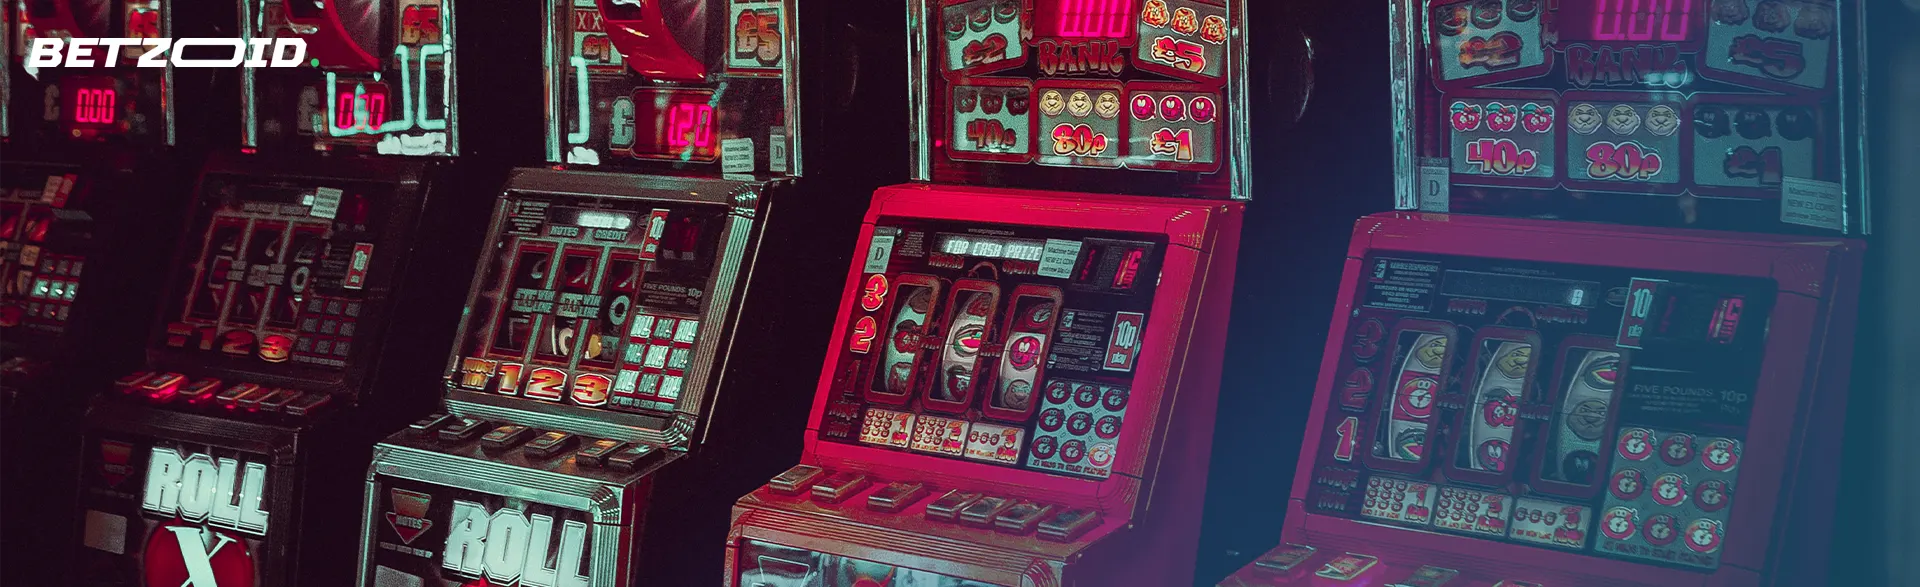 Slot machines, perhaps found in instant withdrawal casinos, where players can enjoy rapid access to their winnings.